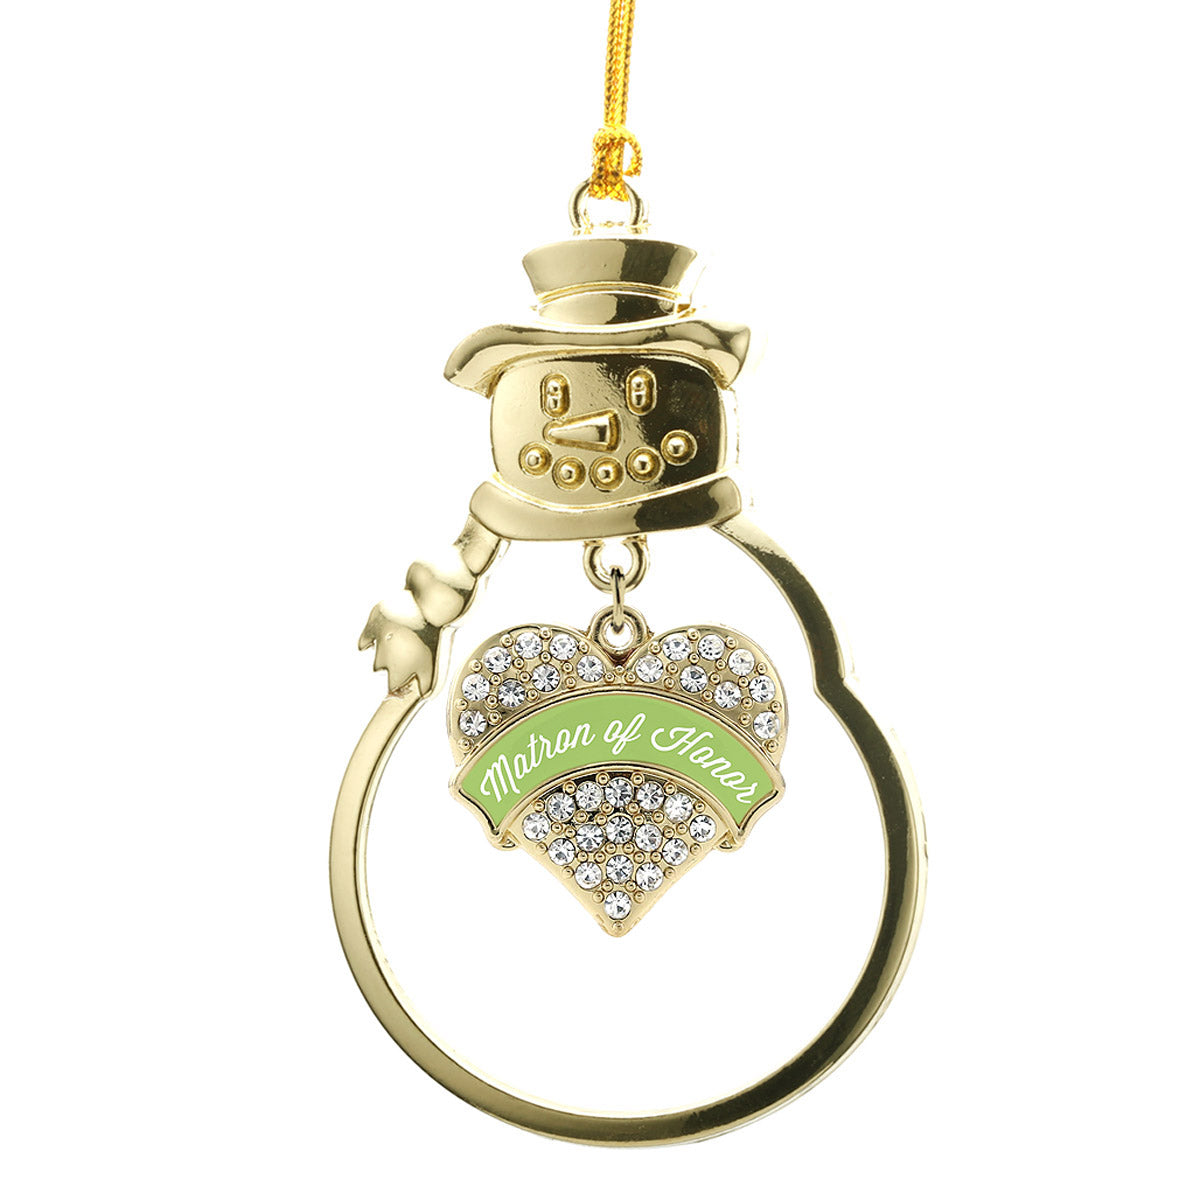 Gold Sage Green Matron of Honor Pave Heart Charm Snowman Ornament